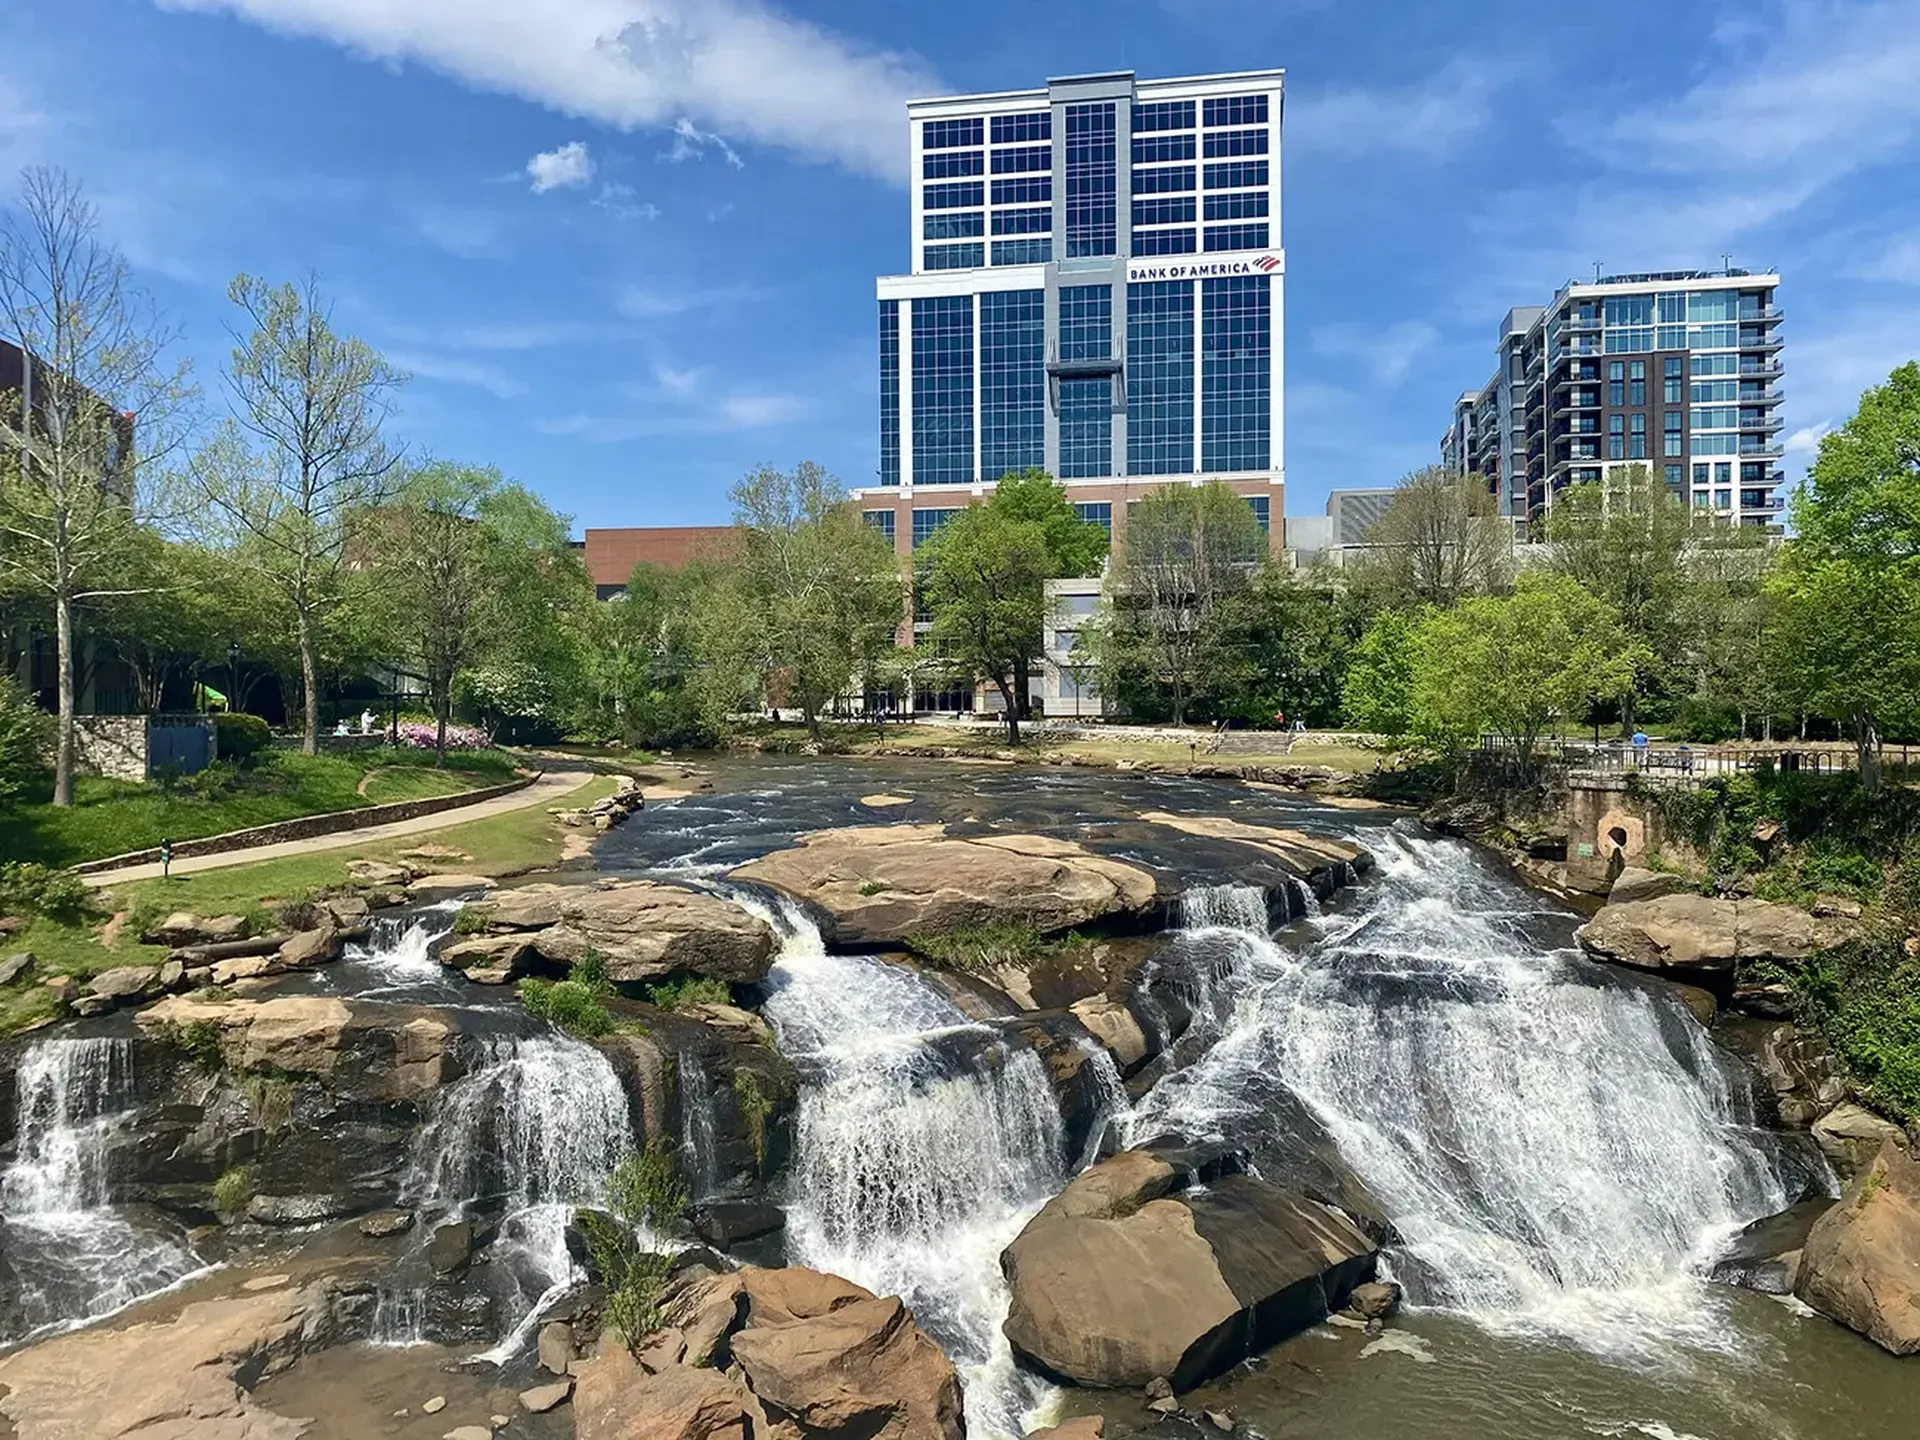 41 Things To Do In Greenville South